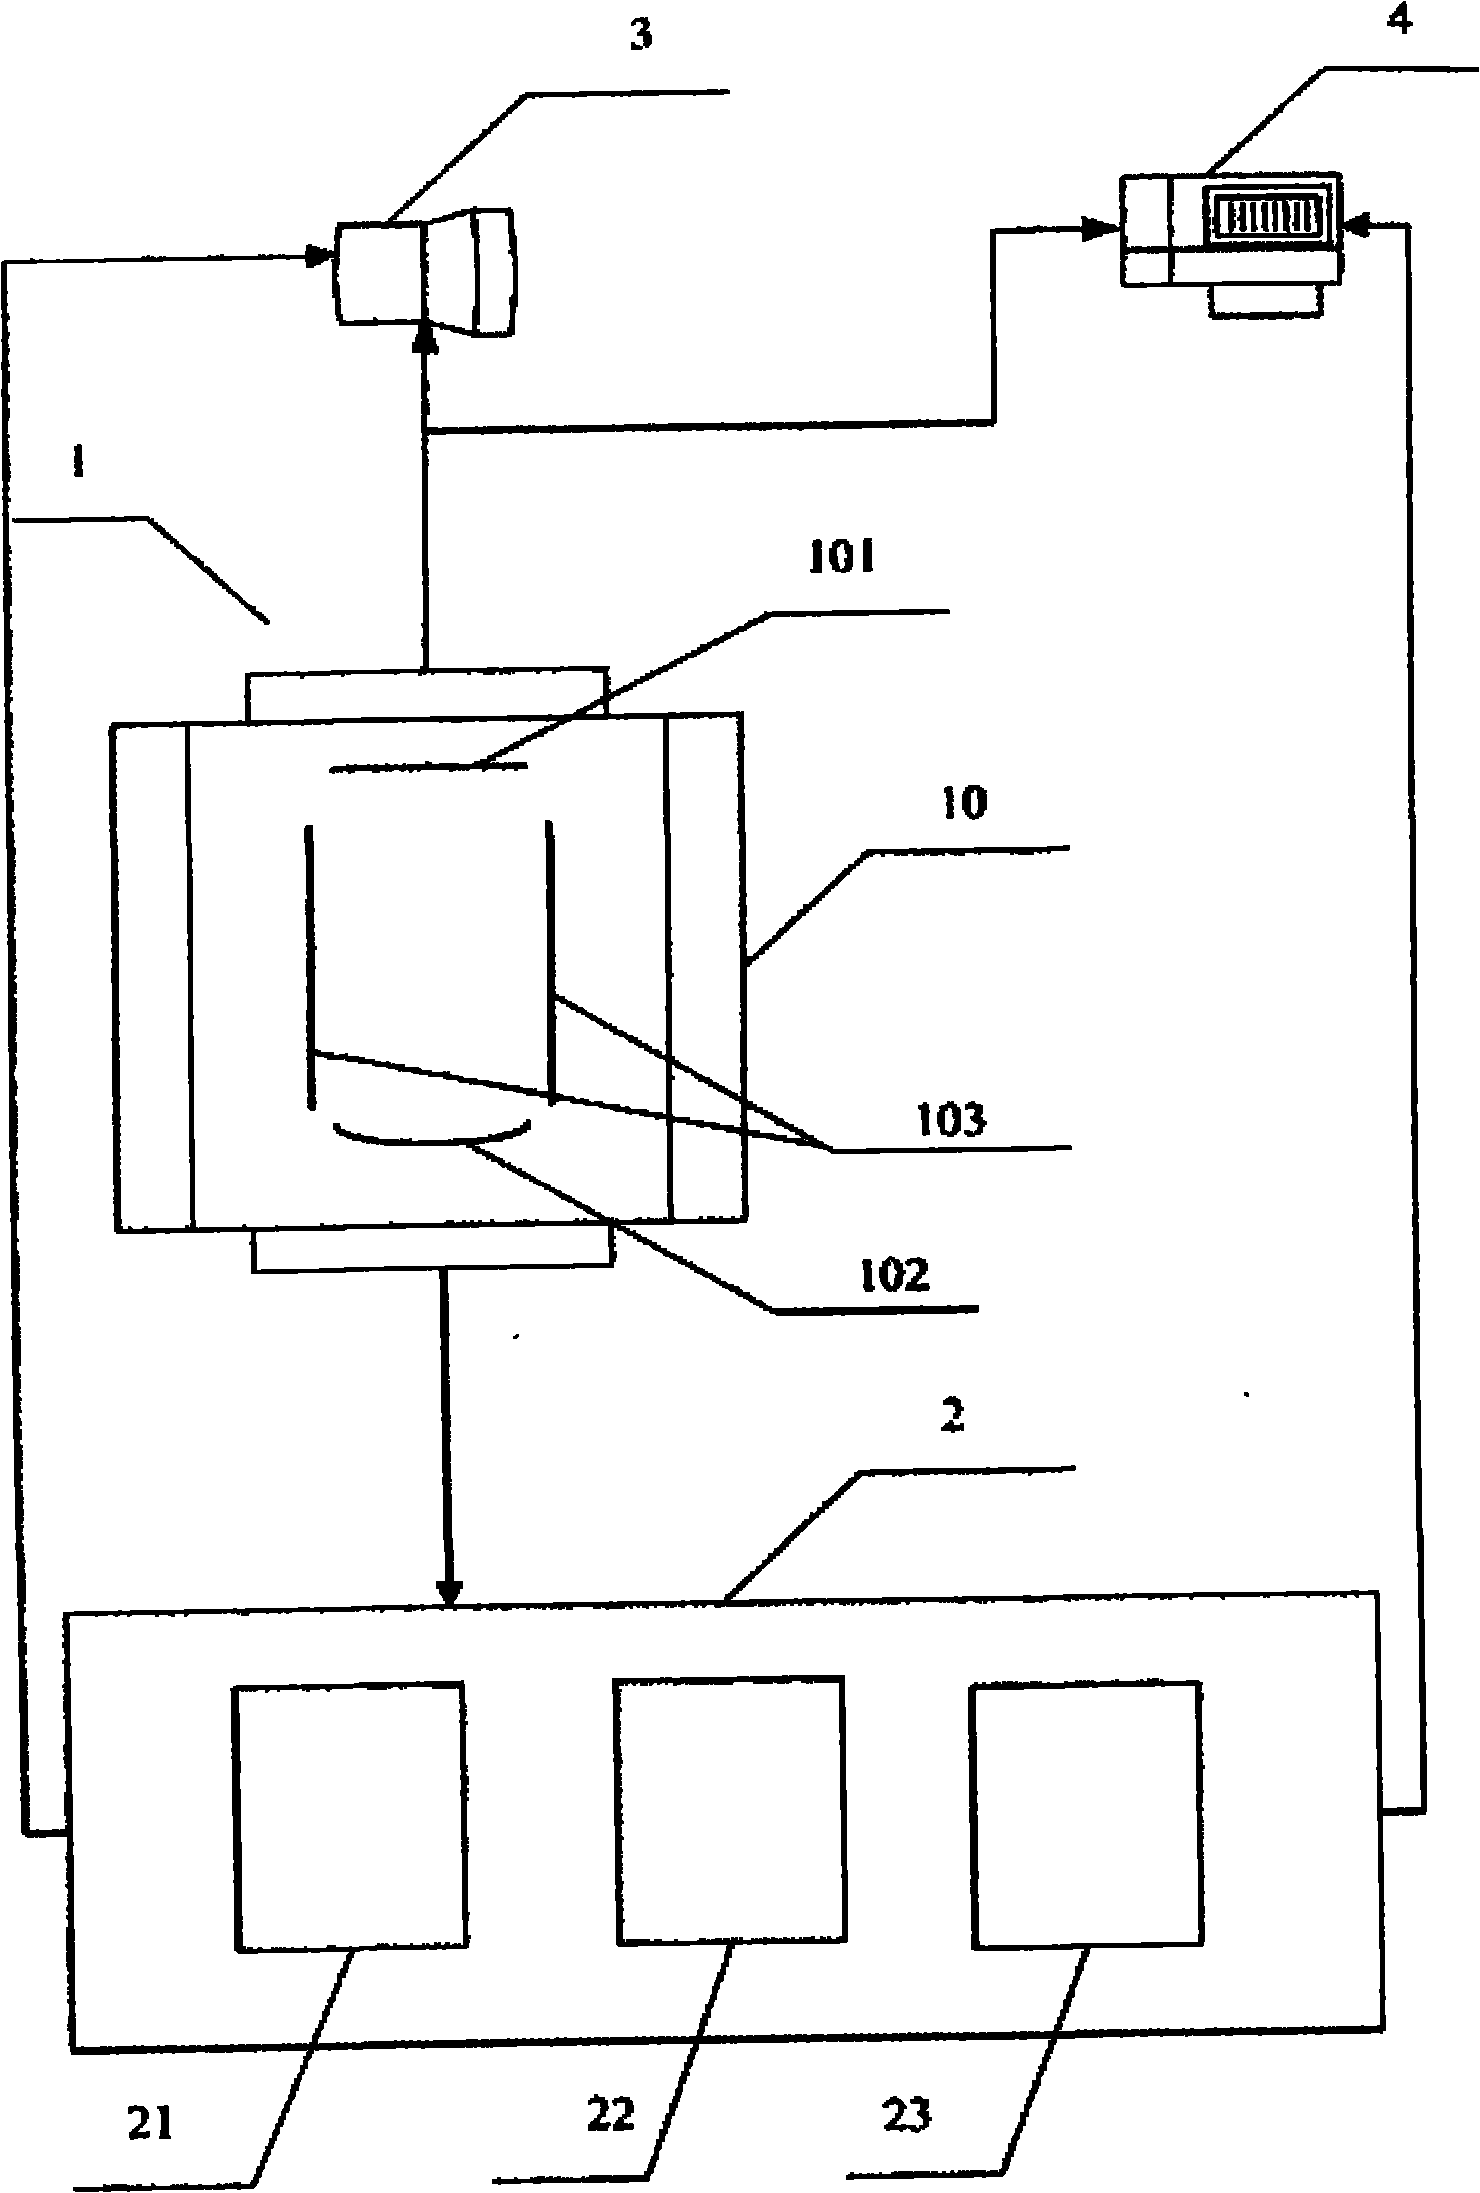 Intelligent foot shape measuring instrument capable of being used for scanning and measuring foot shapes